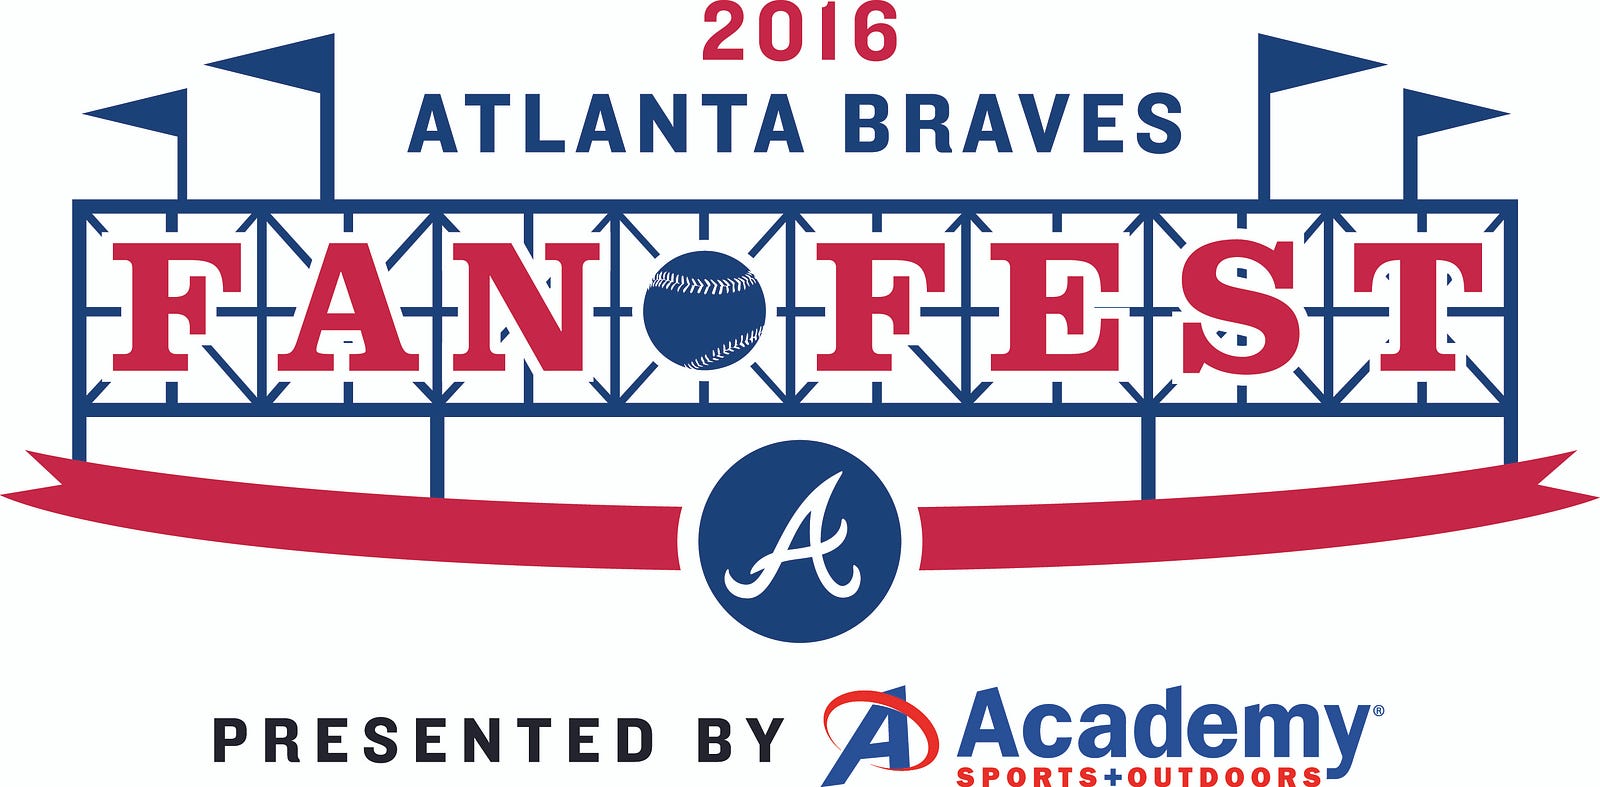 Braves FanFest 2016 — We’ll See You There! Braves Give